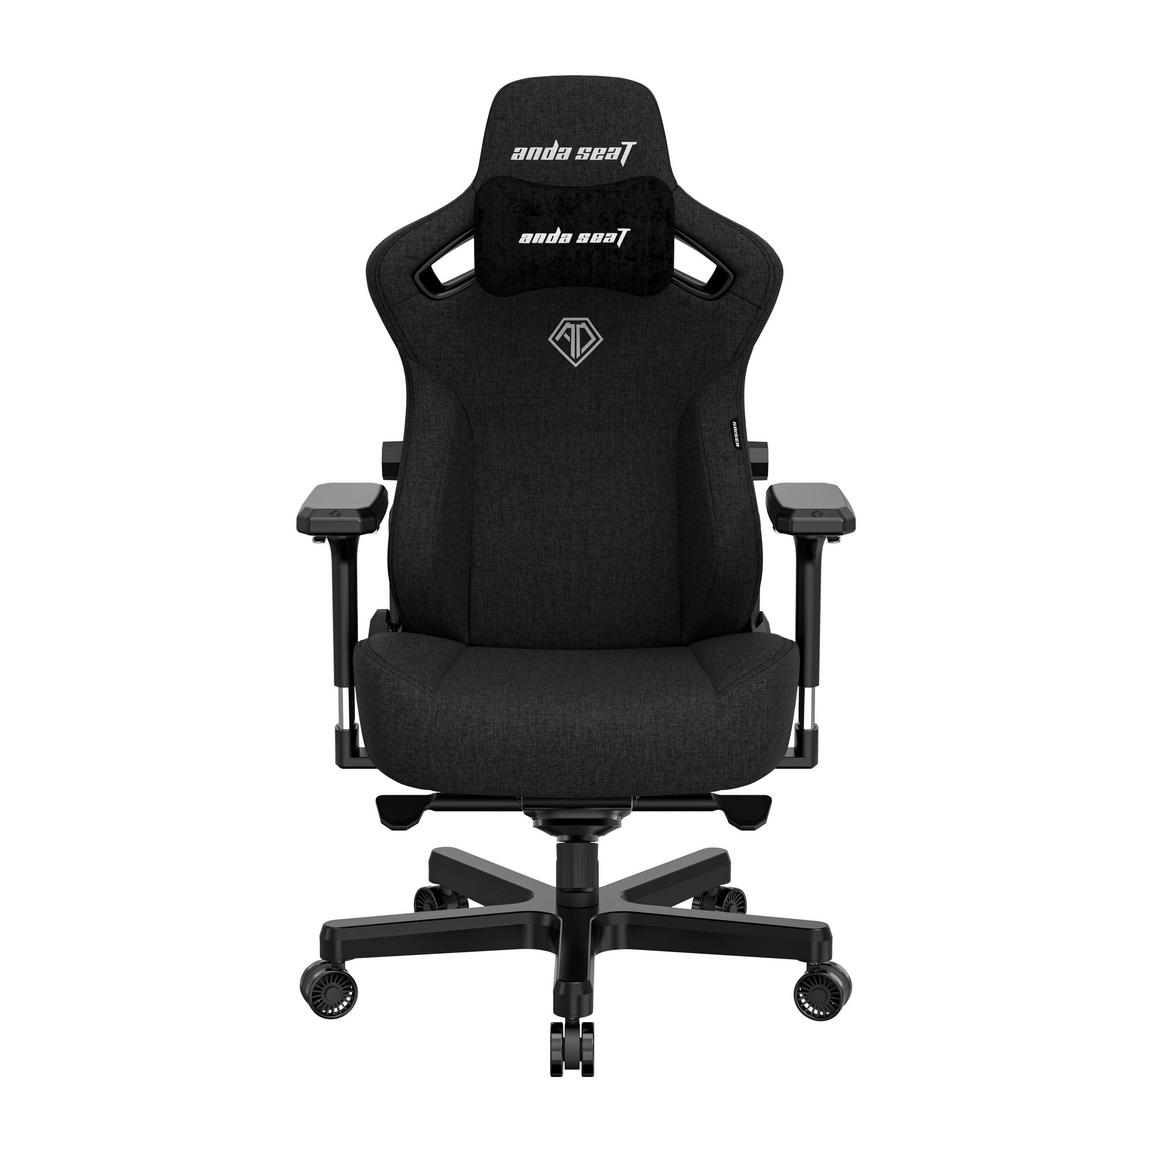 AndaSeat Kaiser 3 L Gaming Chair - Black Linen Fabric